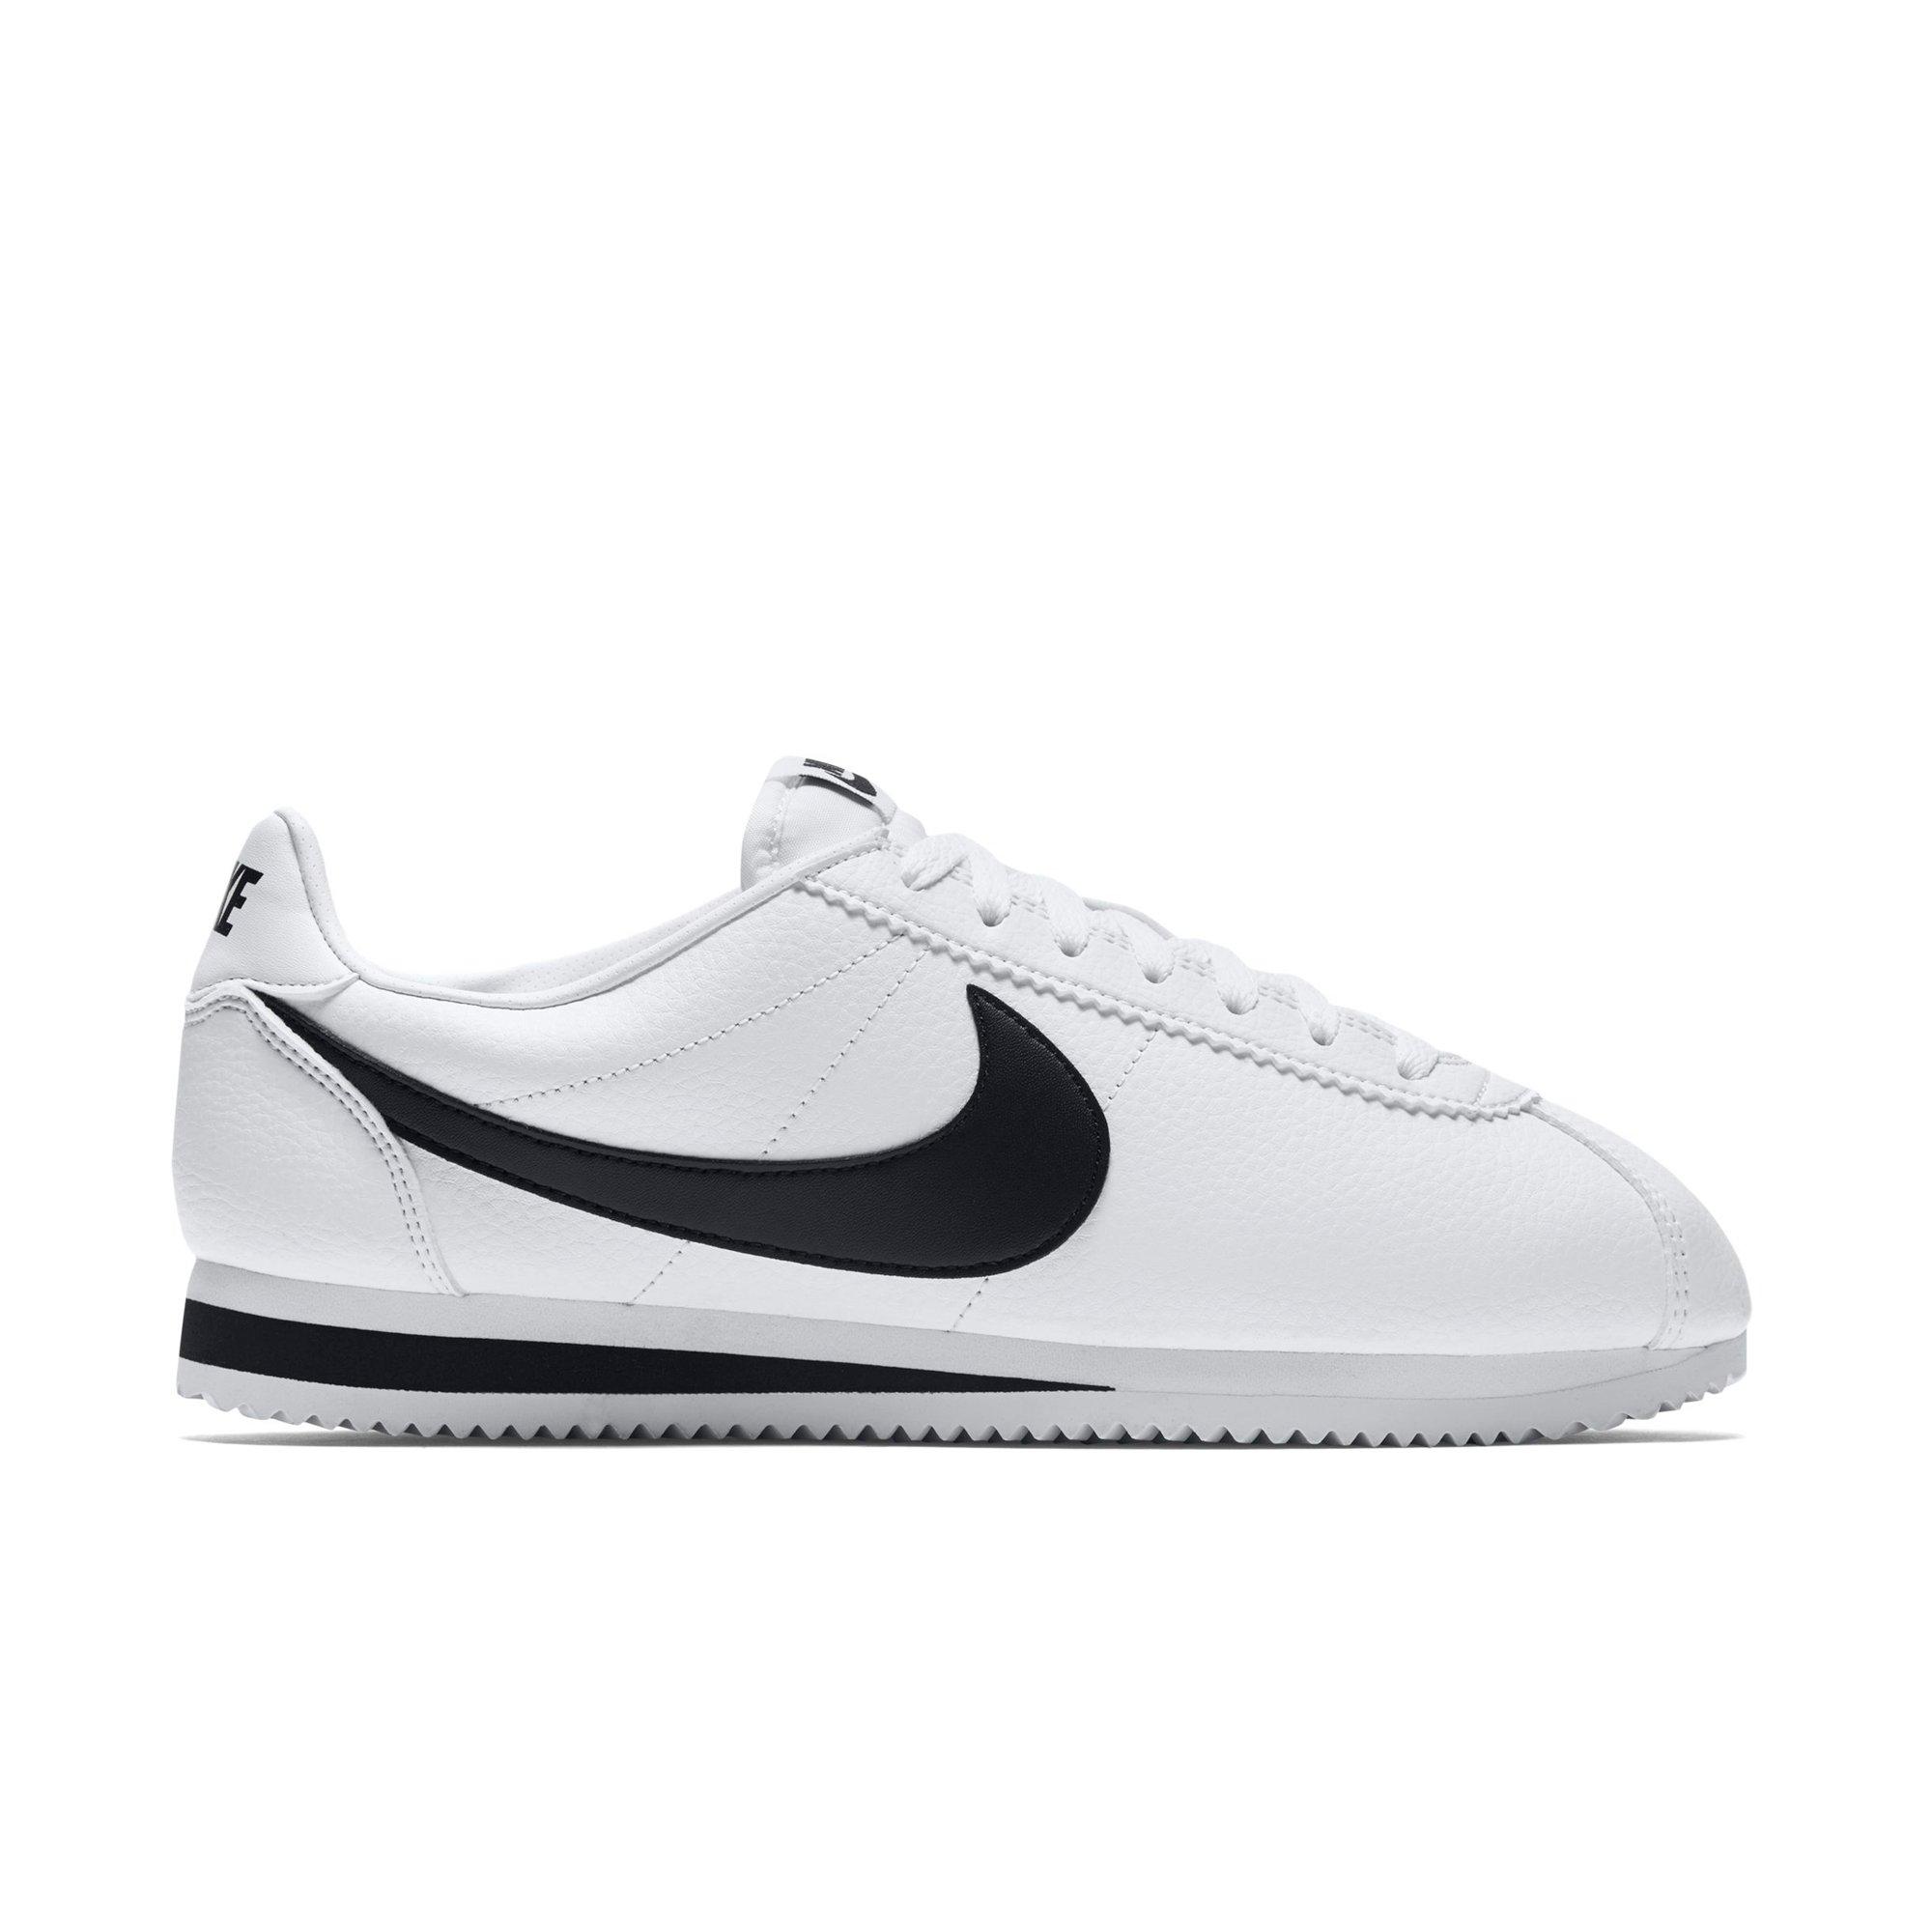 nike cortez black and white leather mens